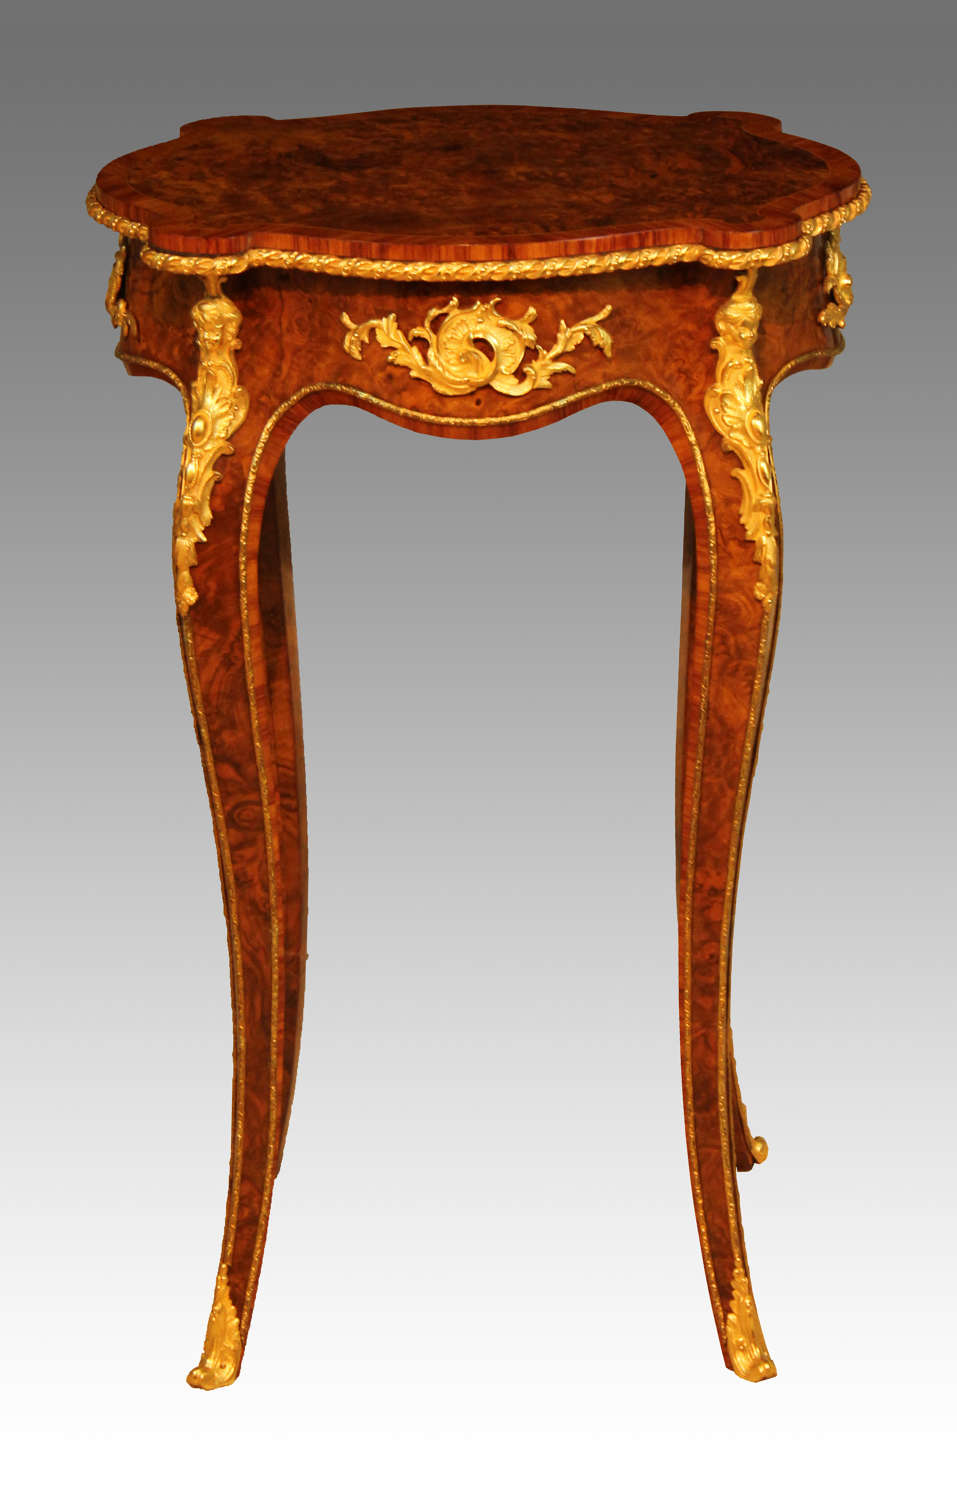 A Victorian Burr Walnut Inlaid and Ormolu Mounted Table